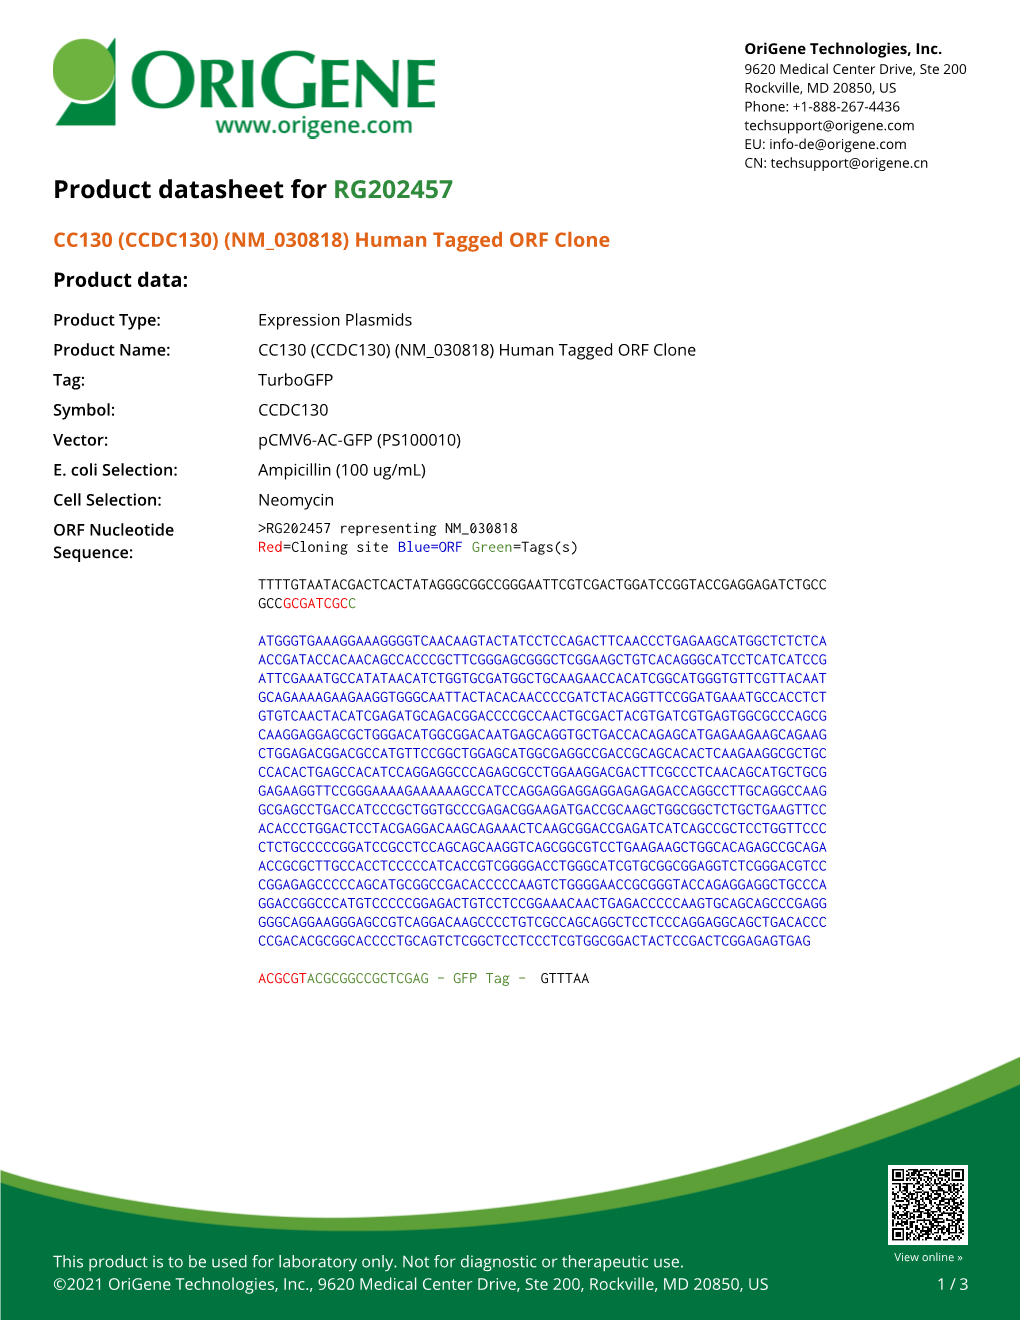 CC130 (CCDC130) (NM 030818) Human Tagged ORF Clone Product Data